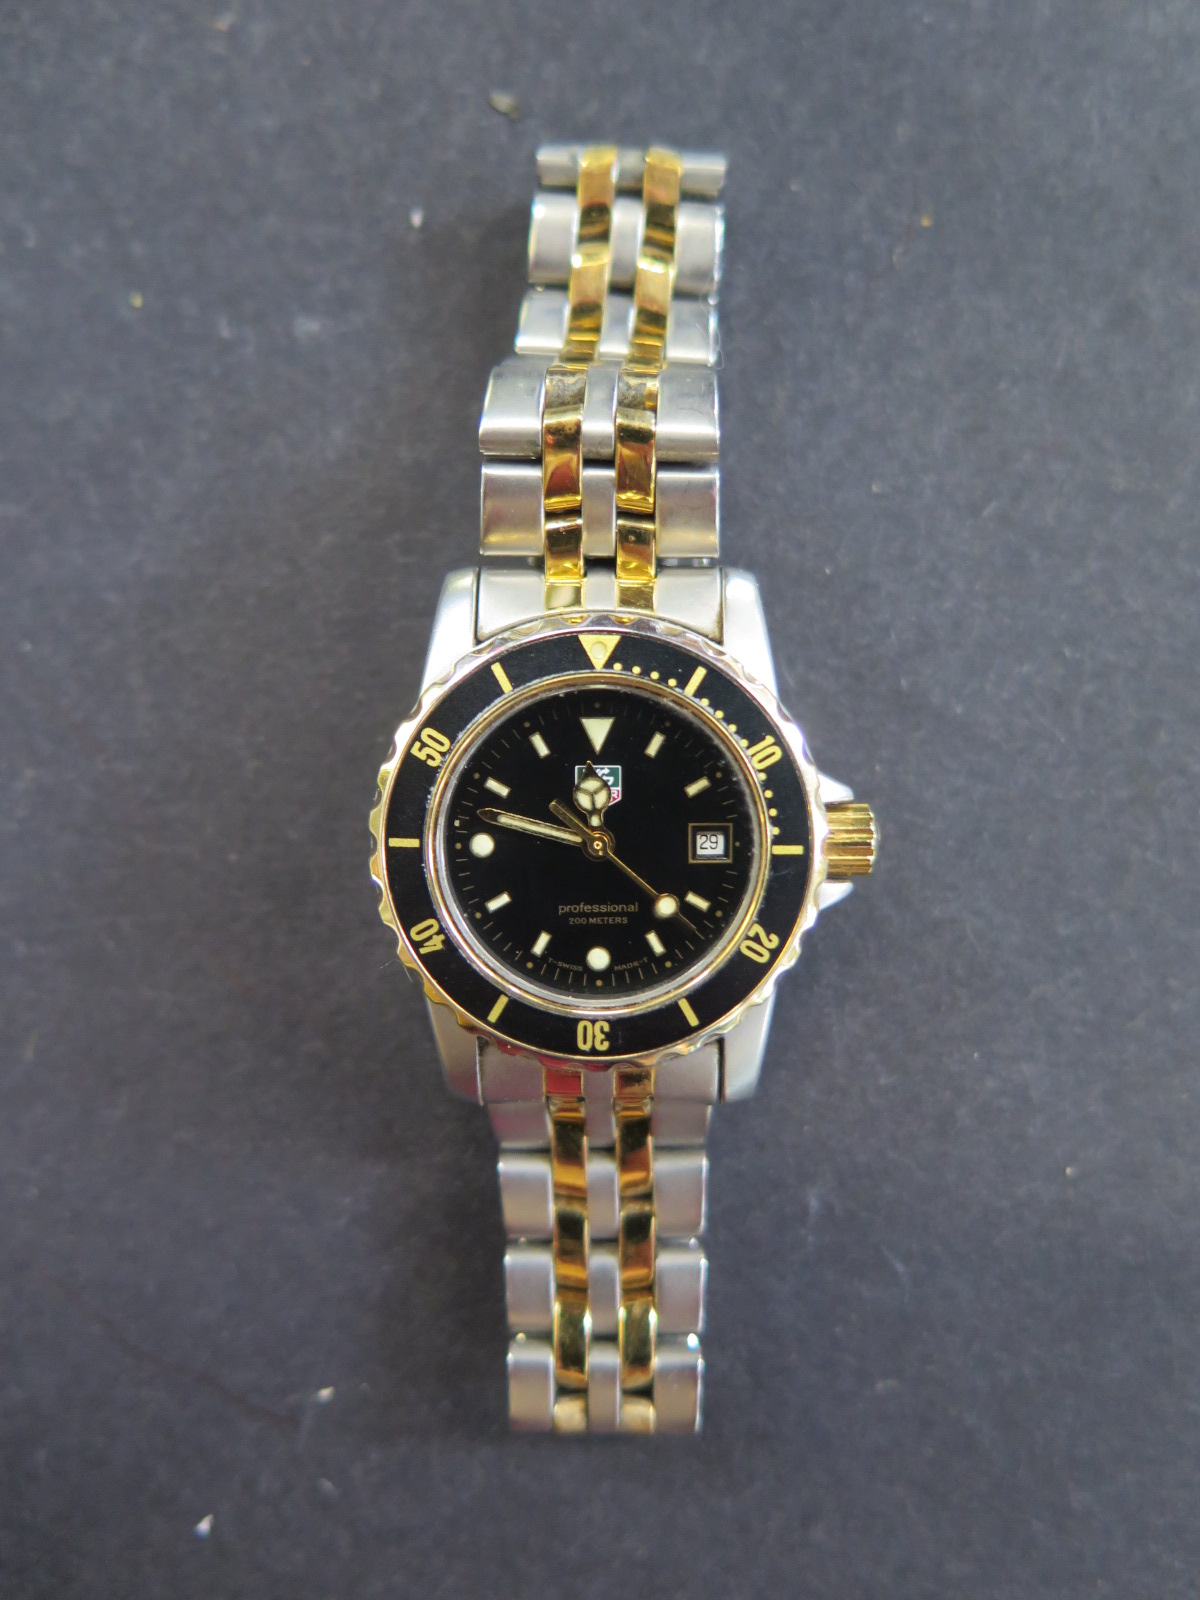 A Tag Heuer ladies bi colour stainless steel professional quartz wristwatch with black bezel and